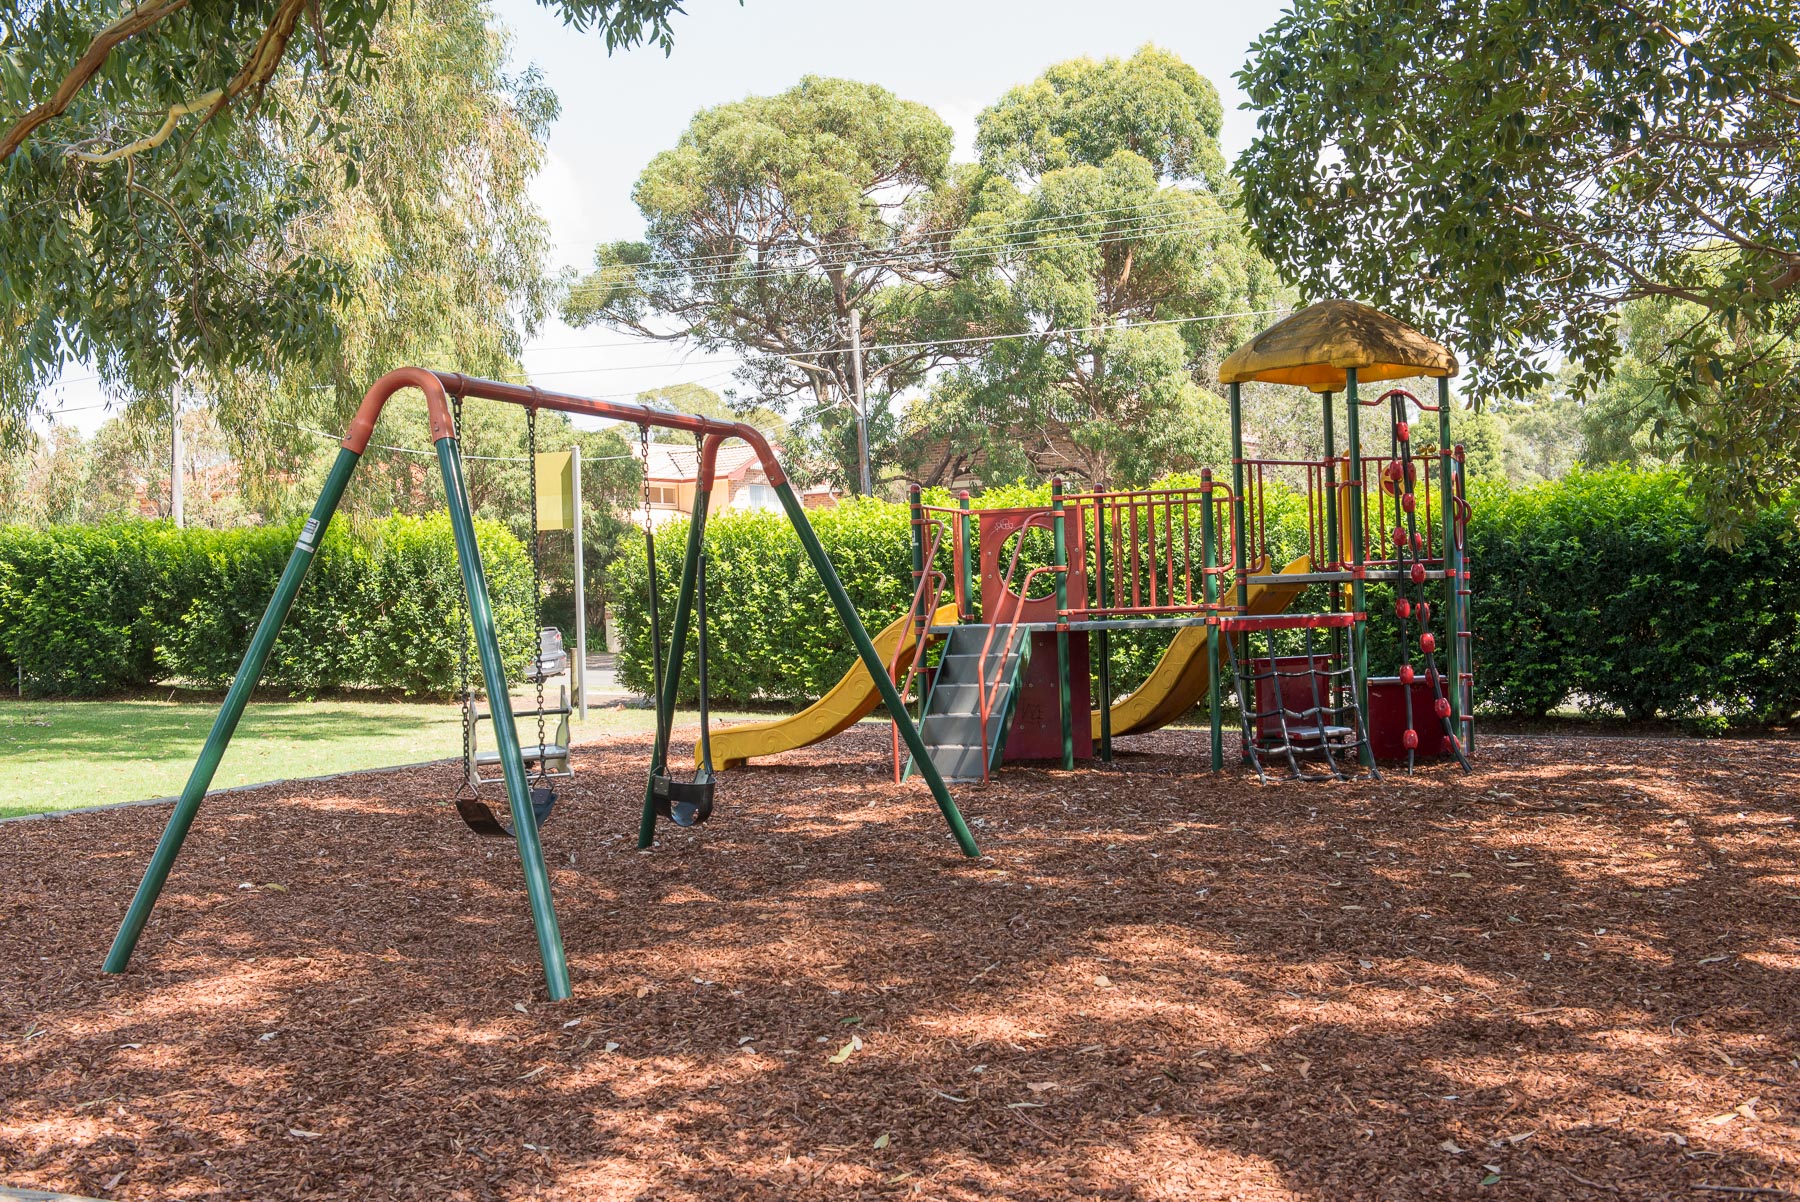 Leafy park with playground